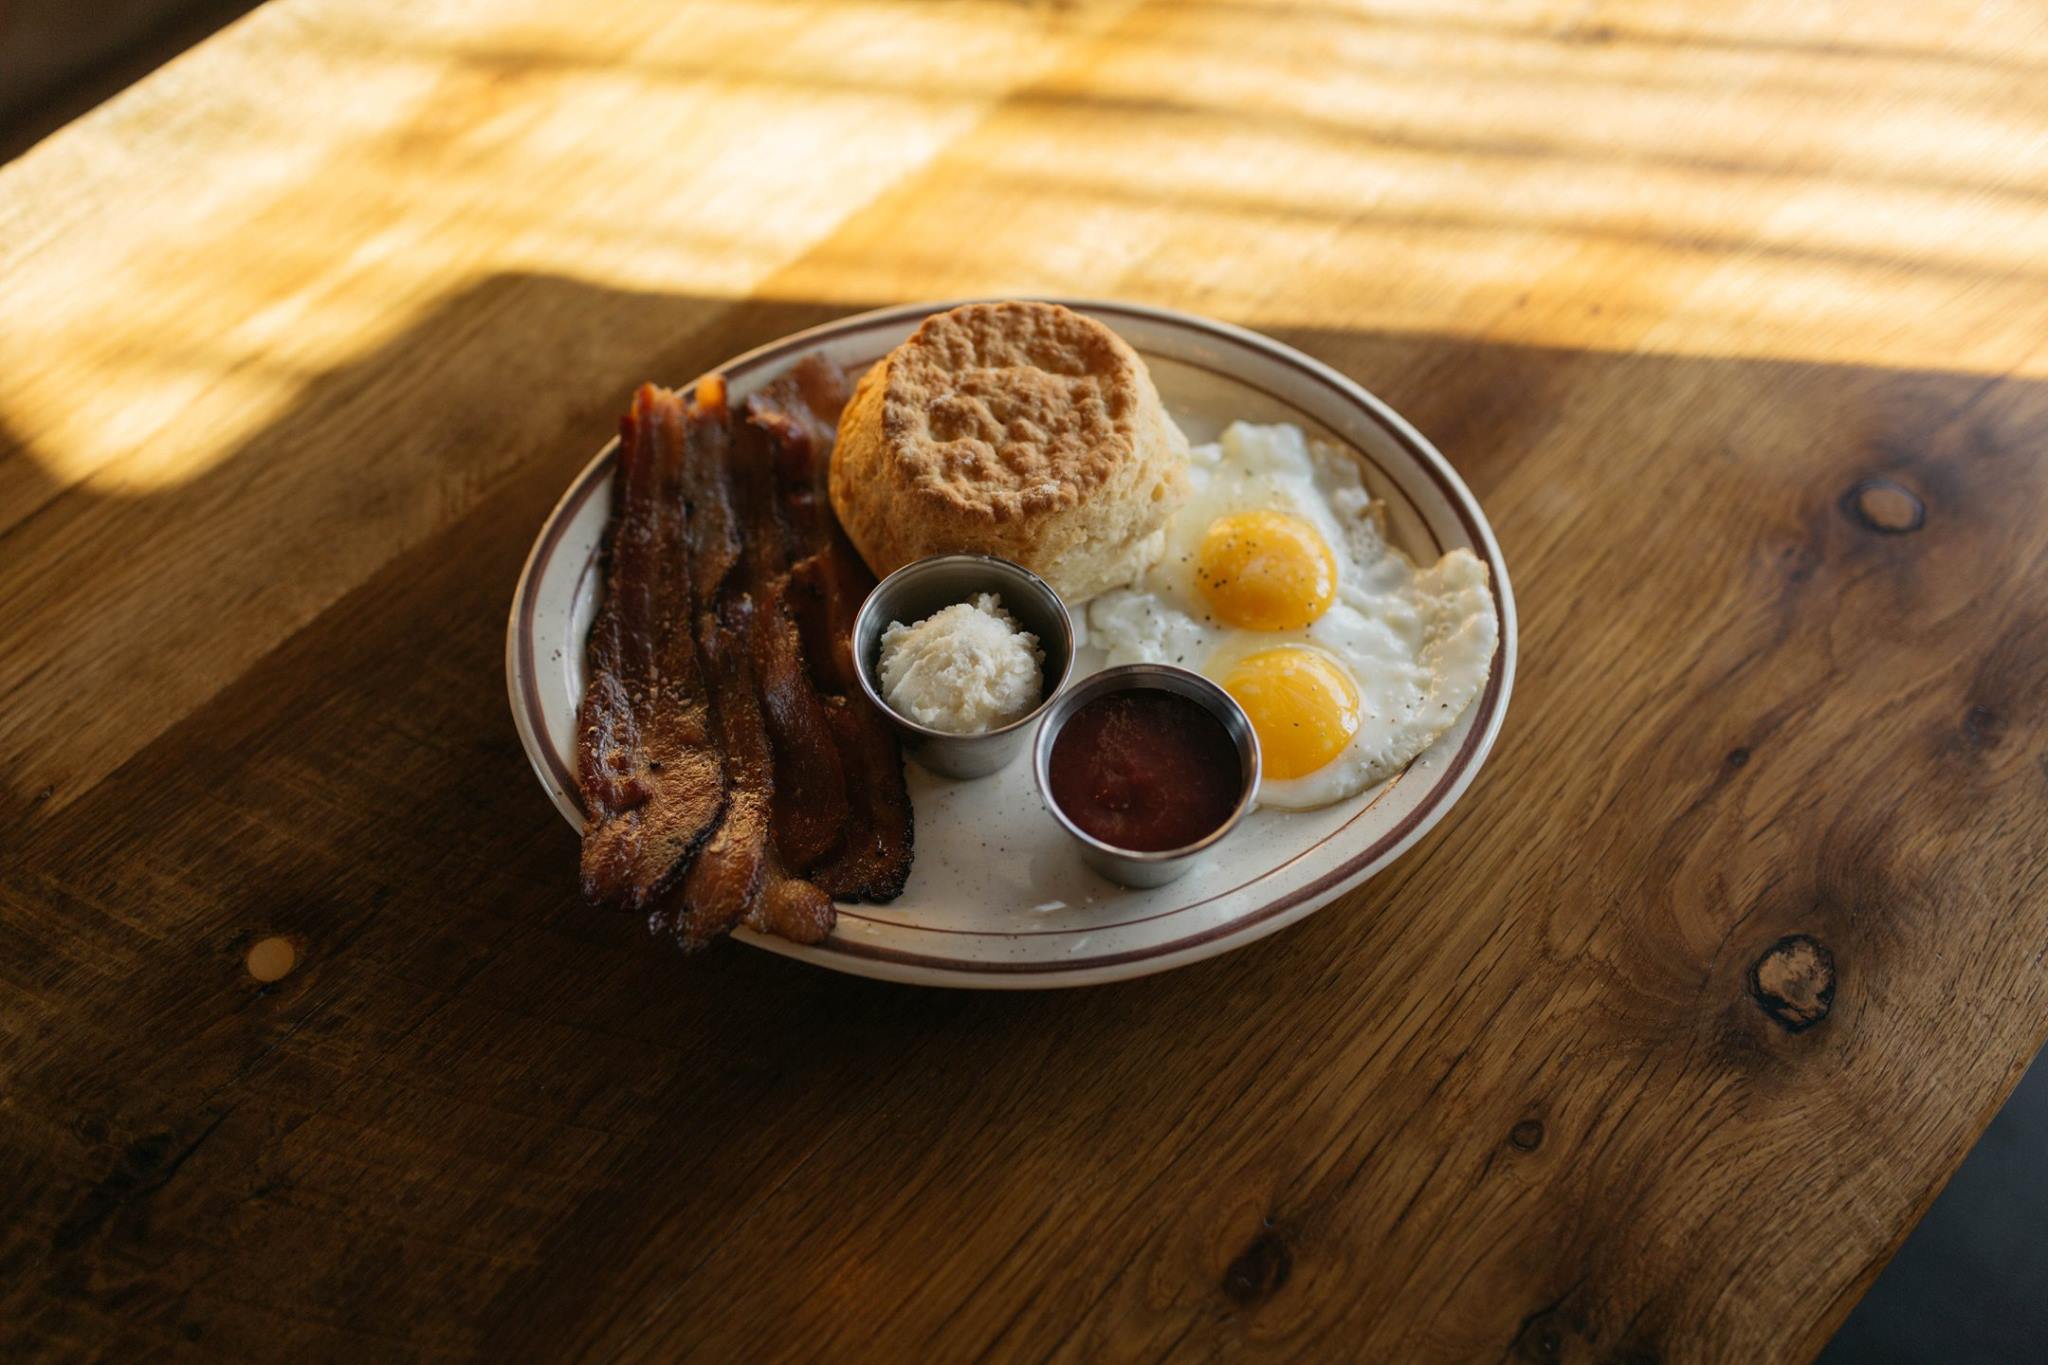 Denver Biscuit Co's bacon, eggs, and biscuit plate